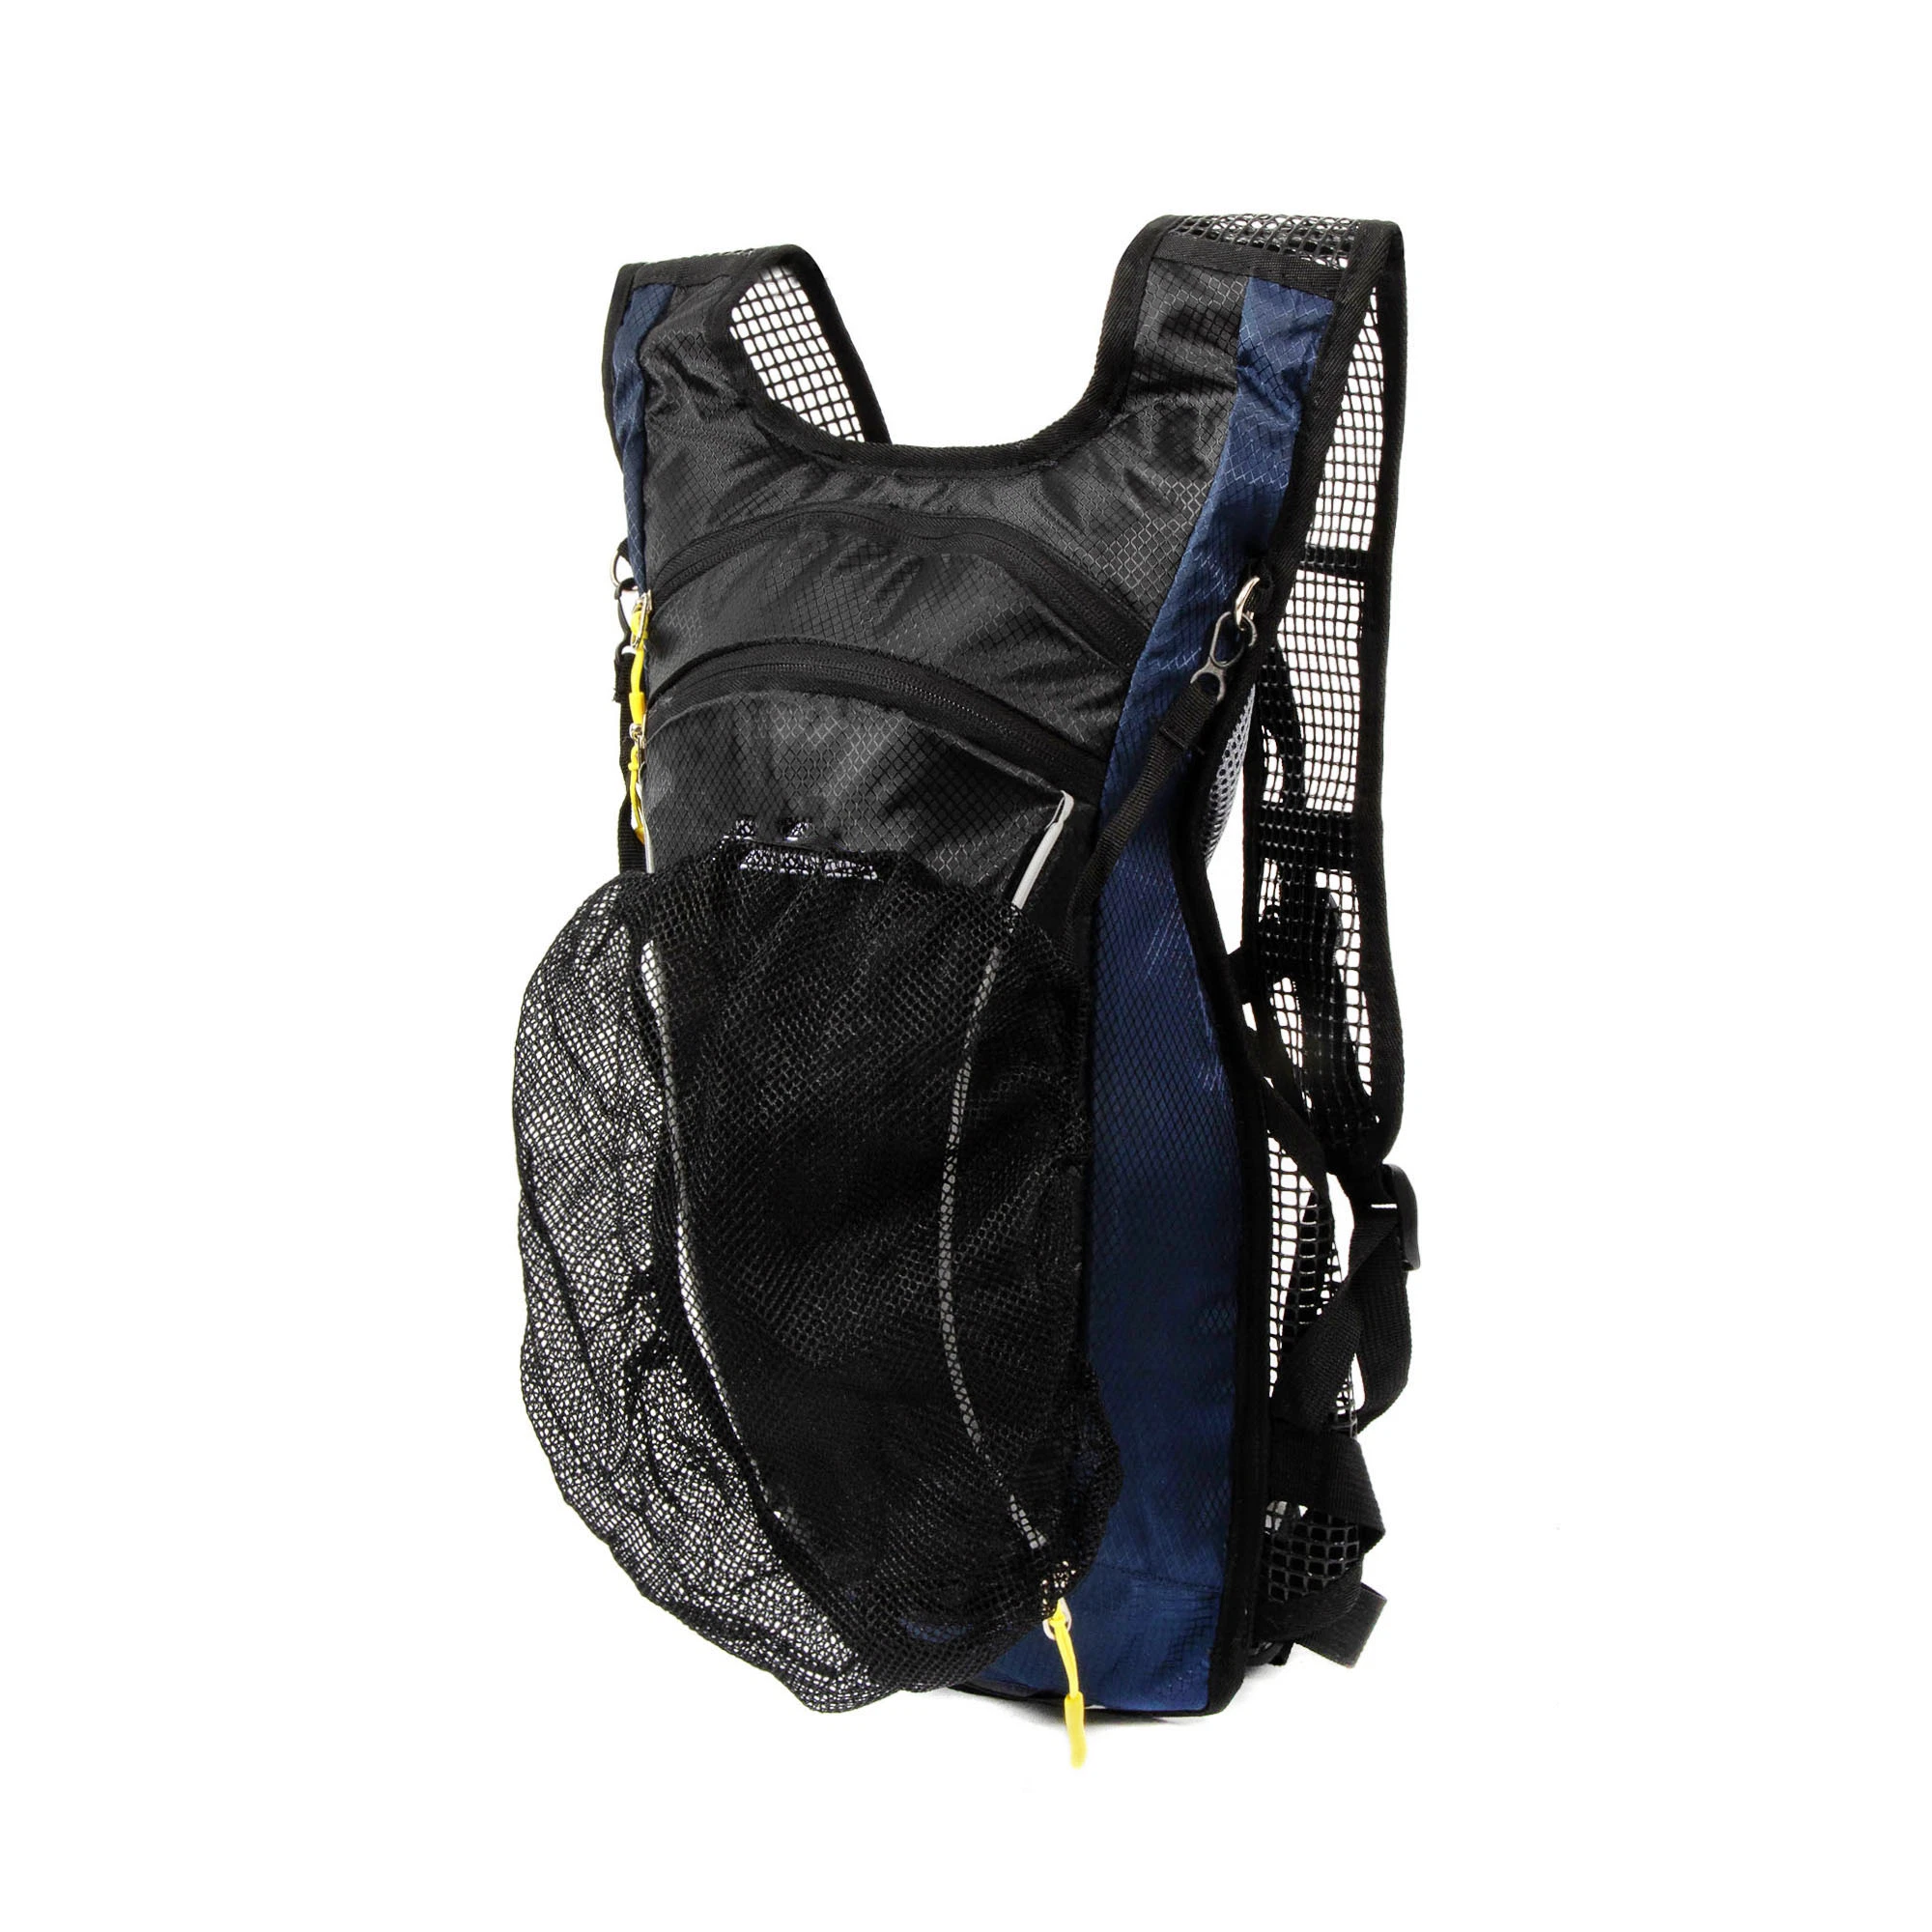 Lightweight Hiking Backpack with 2L Water Bladder